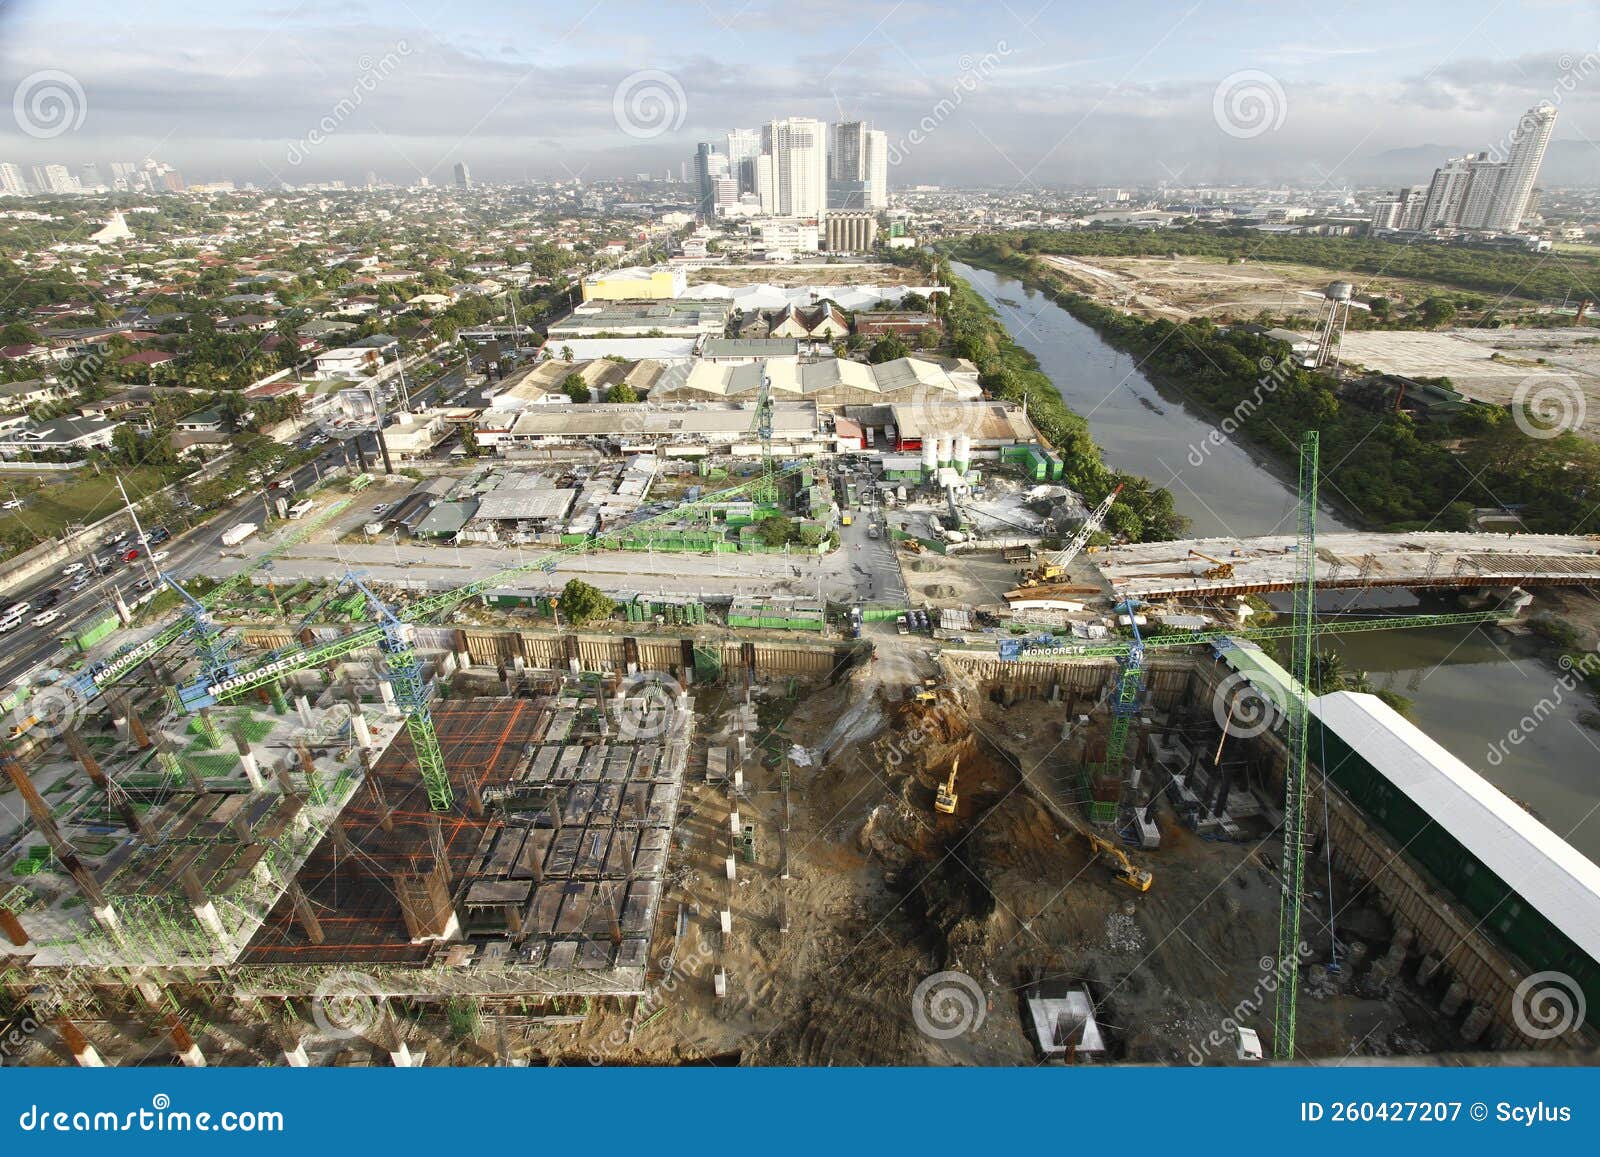 construction and view of surrounding cities at eastwood city, pasig, philippines